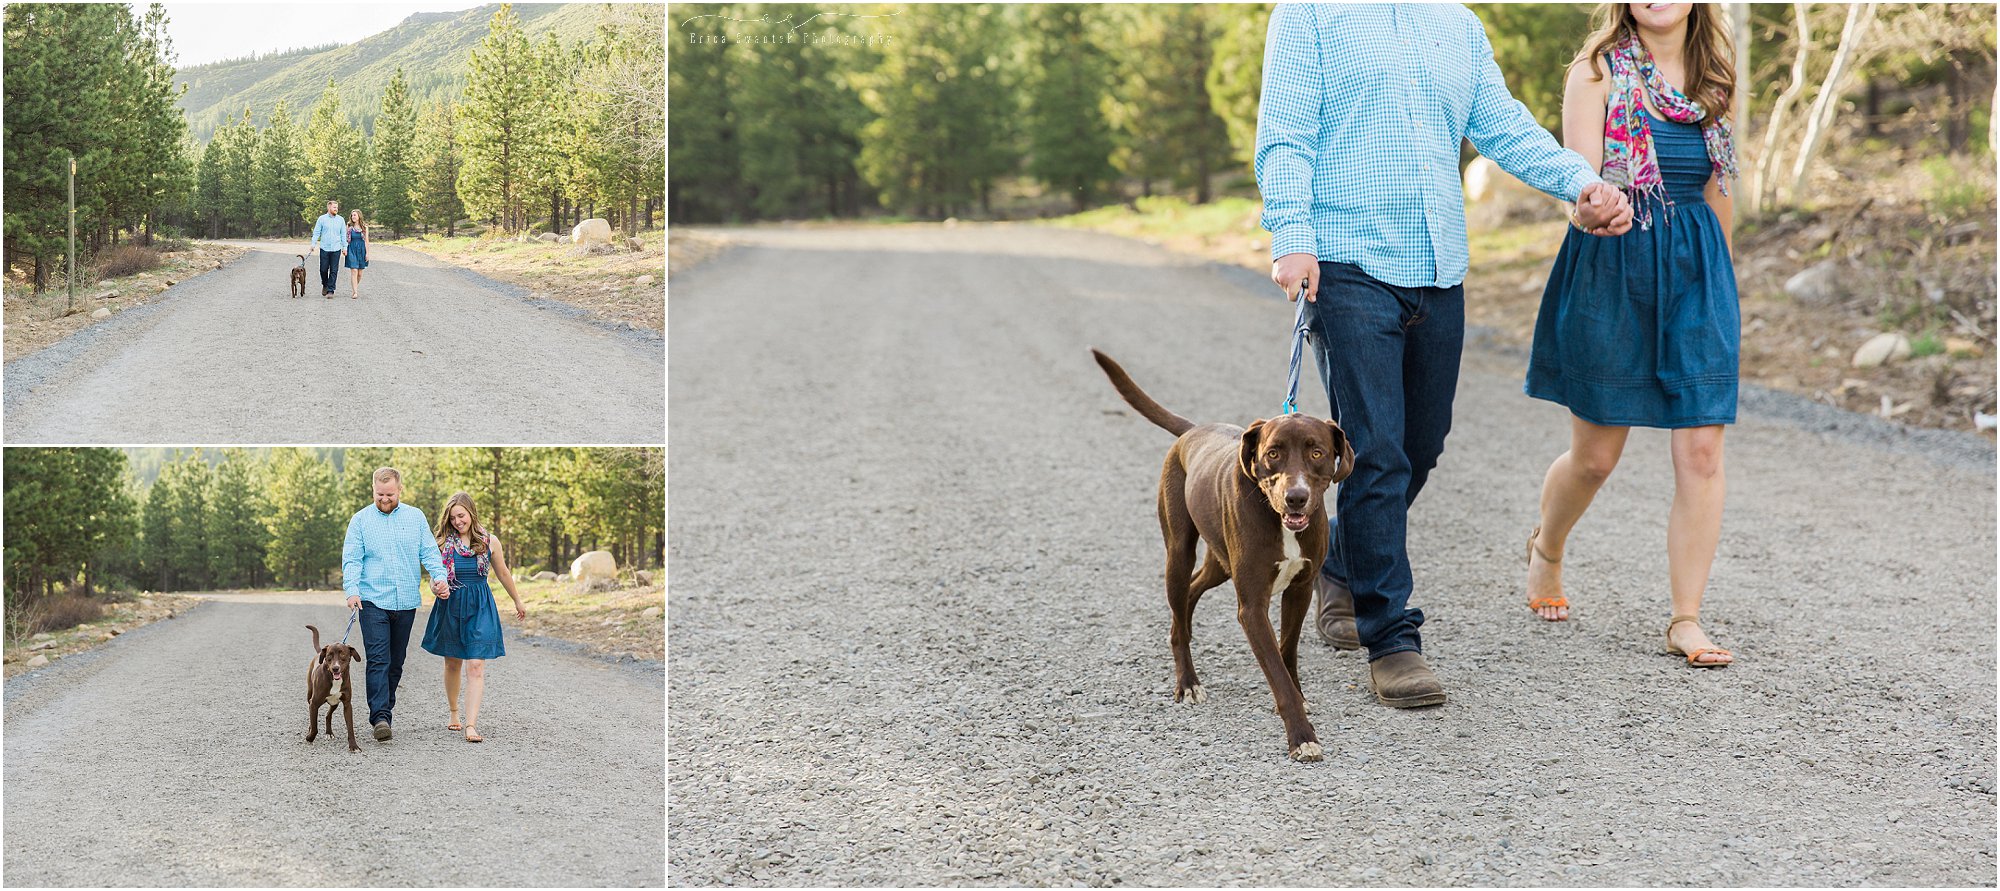 Ranger, the chocolate lab, was definitely a fun part of this cute Bend, Oregon couple's engagement session at Tumalo Creek. | Erica Swantek Photography